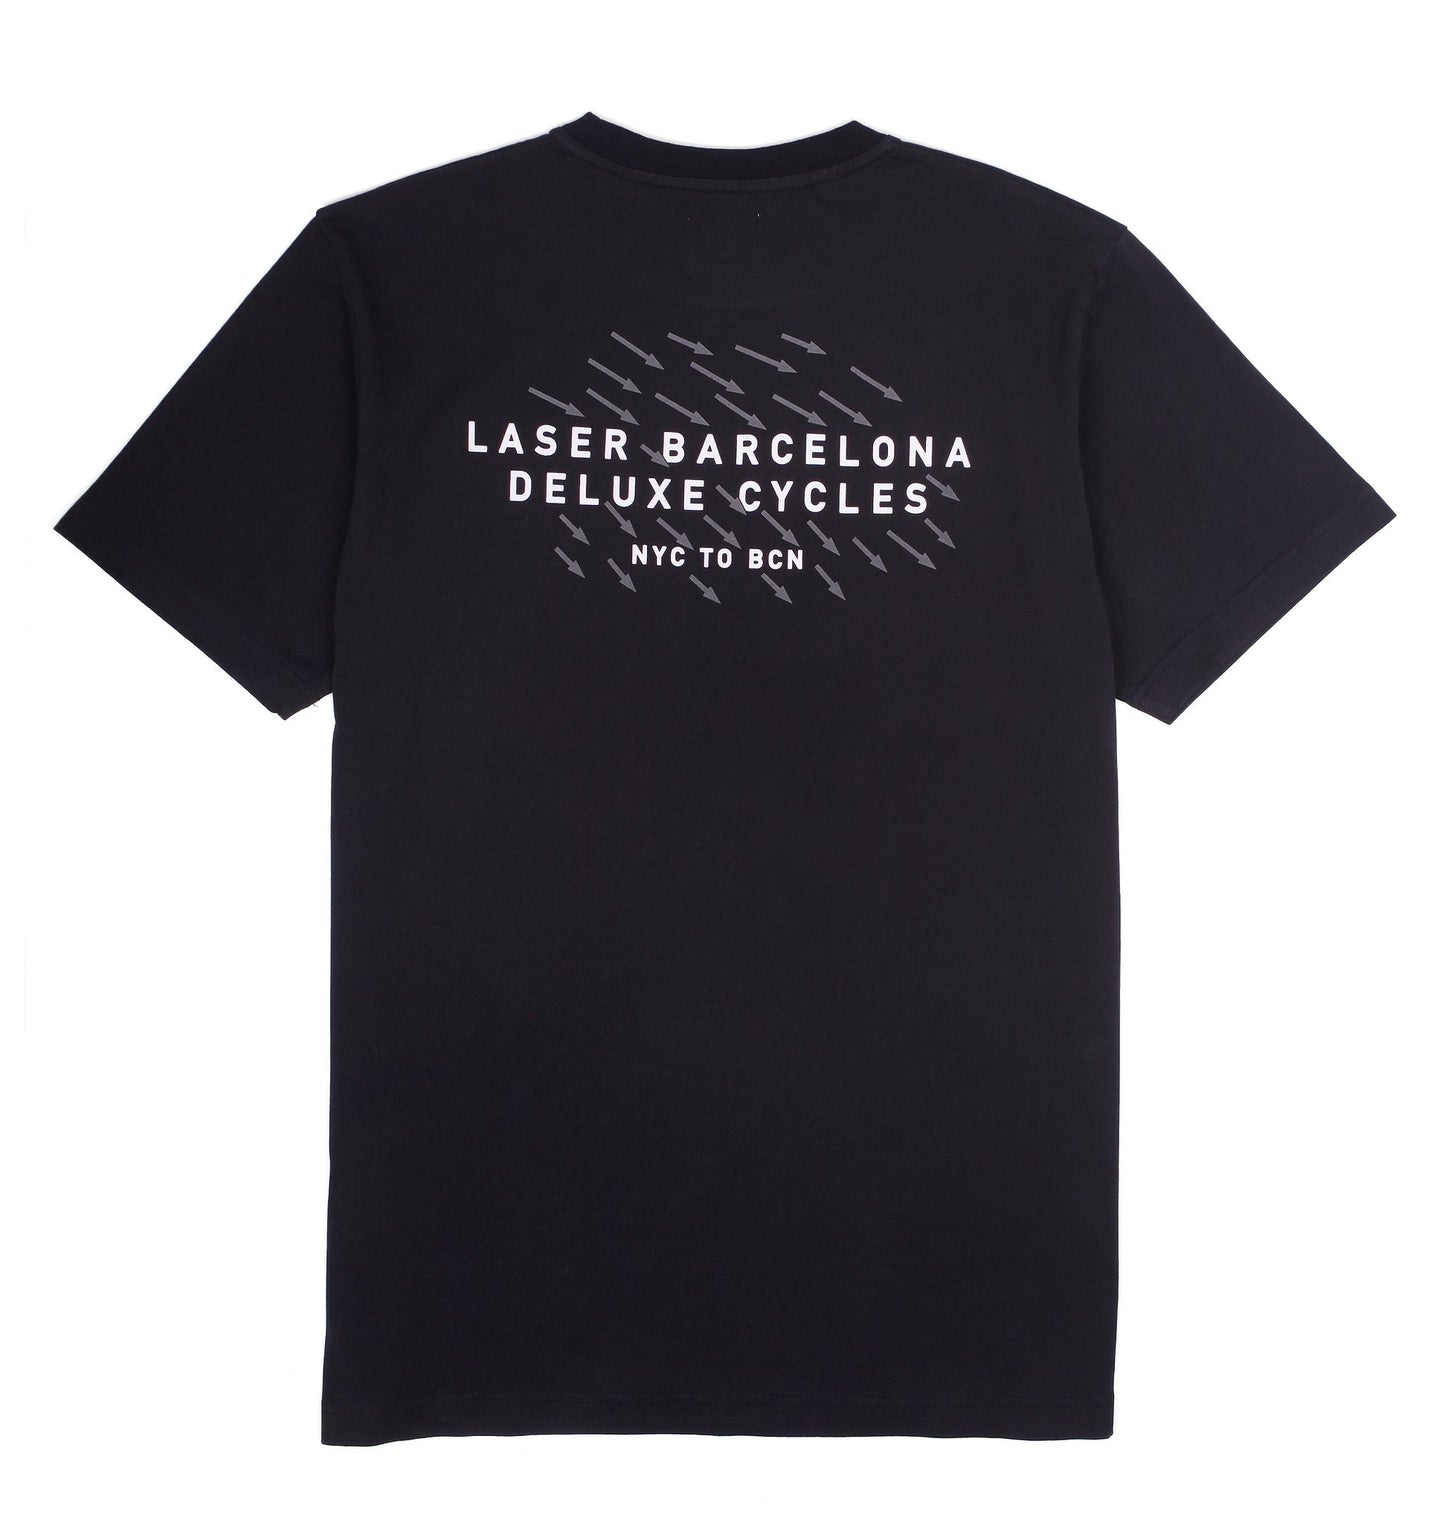 Laser Barcelona x Deluxe Cycles - NYC TO BCN TEE - Black